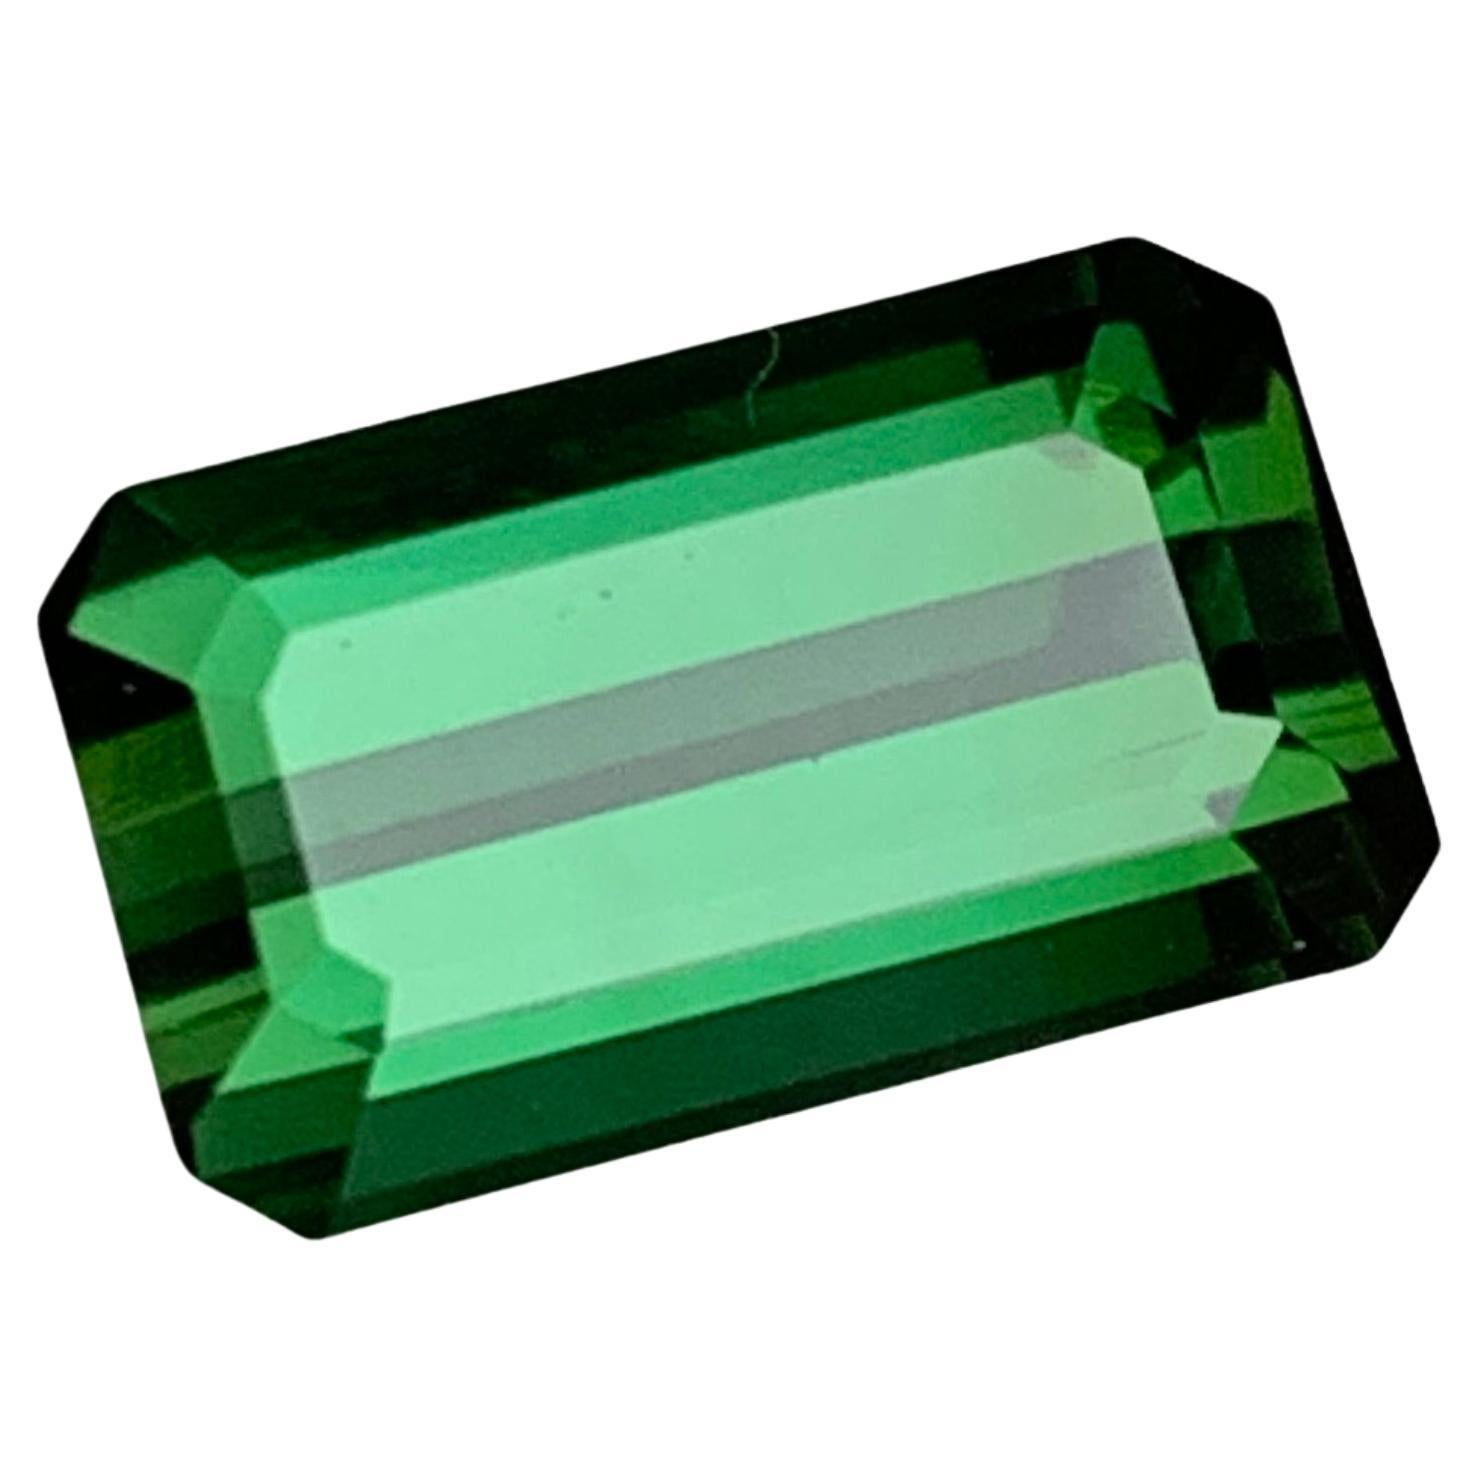 Rare Deep Green Natural Tourmaline Loose Gemstone, 3.75 Ct Emerald Cut for Ring For Sale